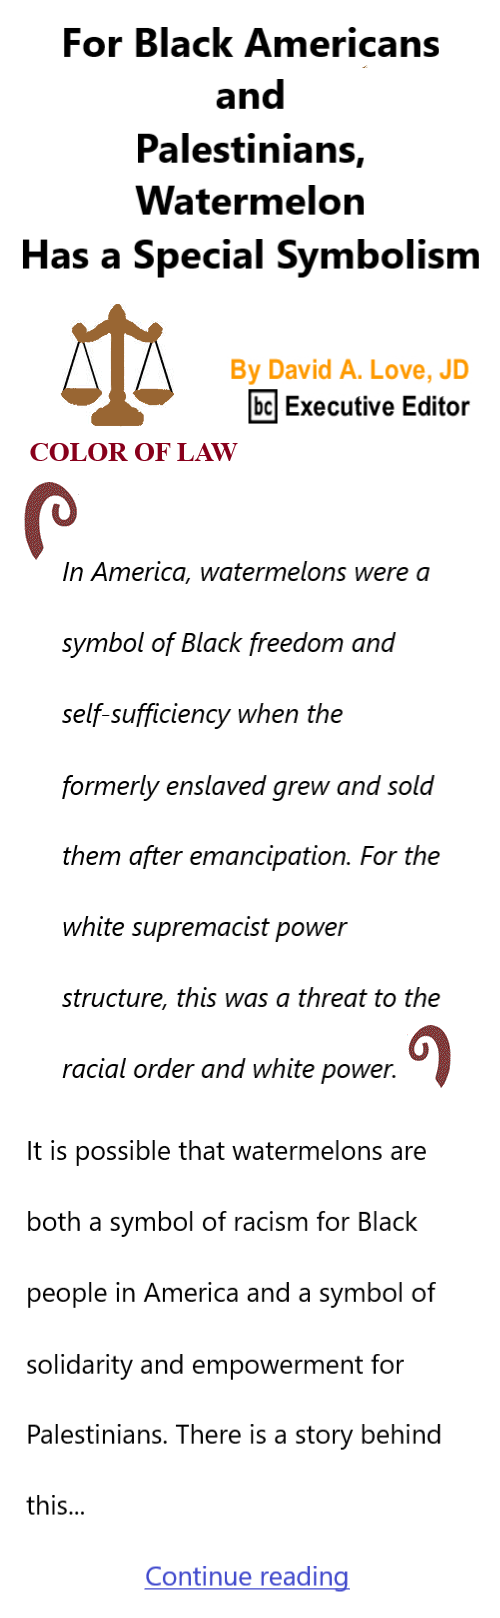 BlackCommentator.com Dec 7, 2023 - Issue 981: For Black Americans and Palestinians, Watermelon Has a Special Symbolism - Color of Law By David A. Love, JD, BC Executive Editor